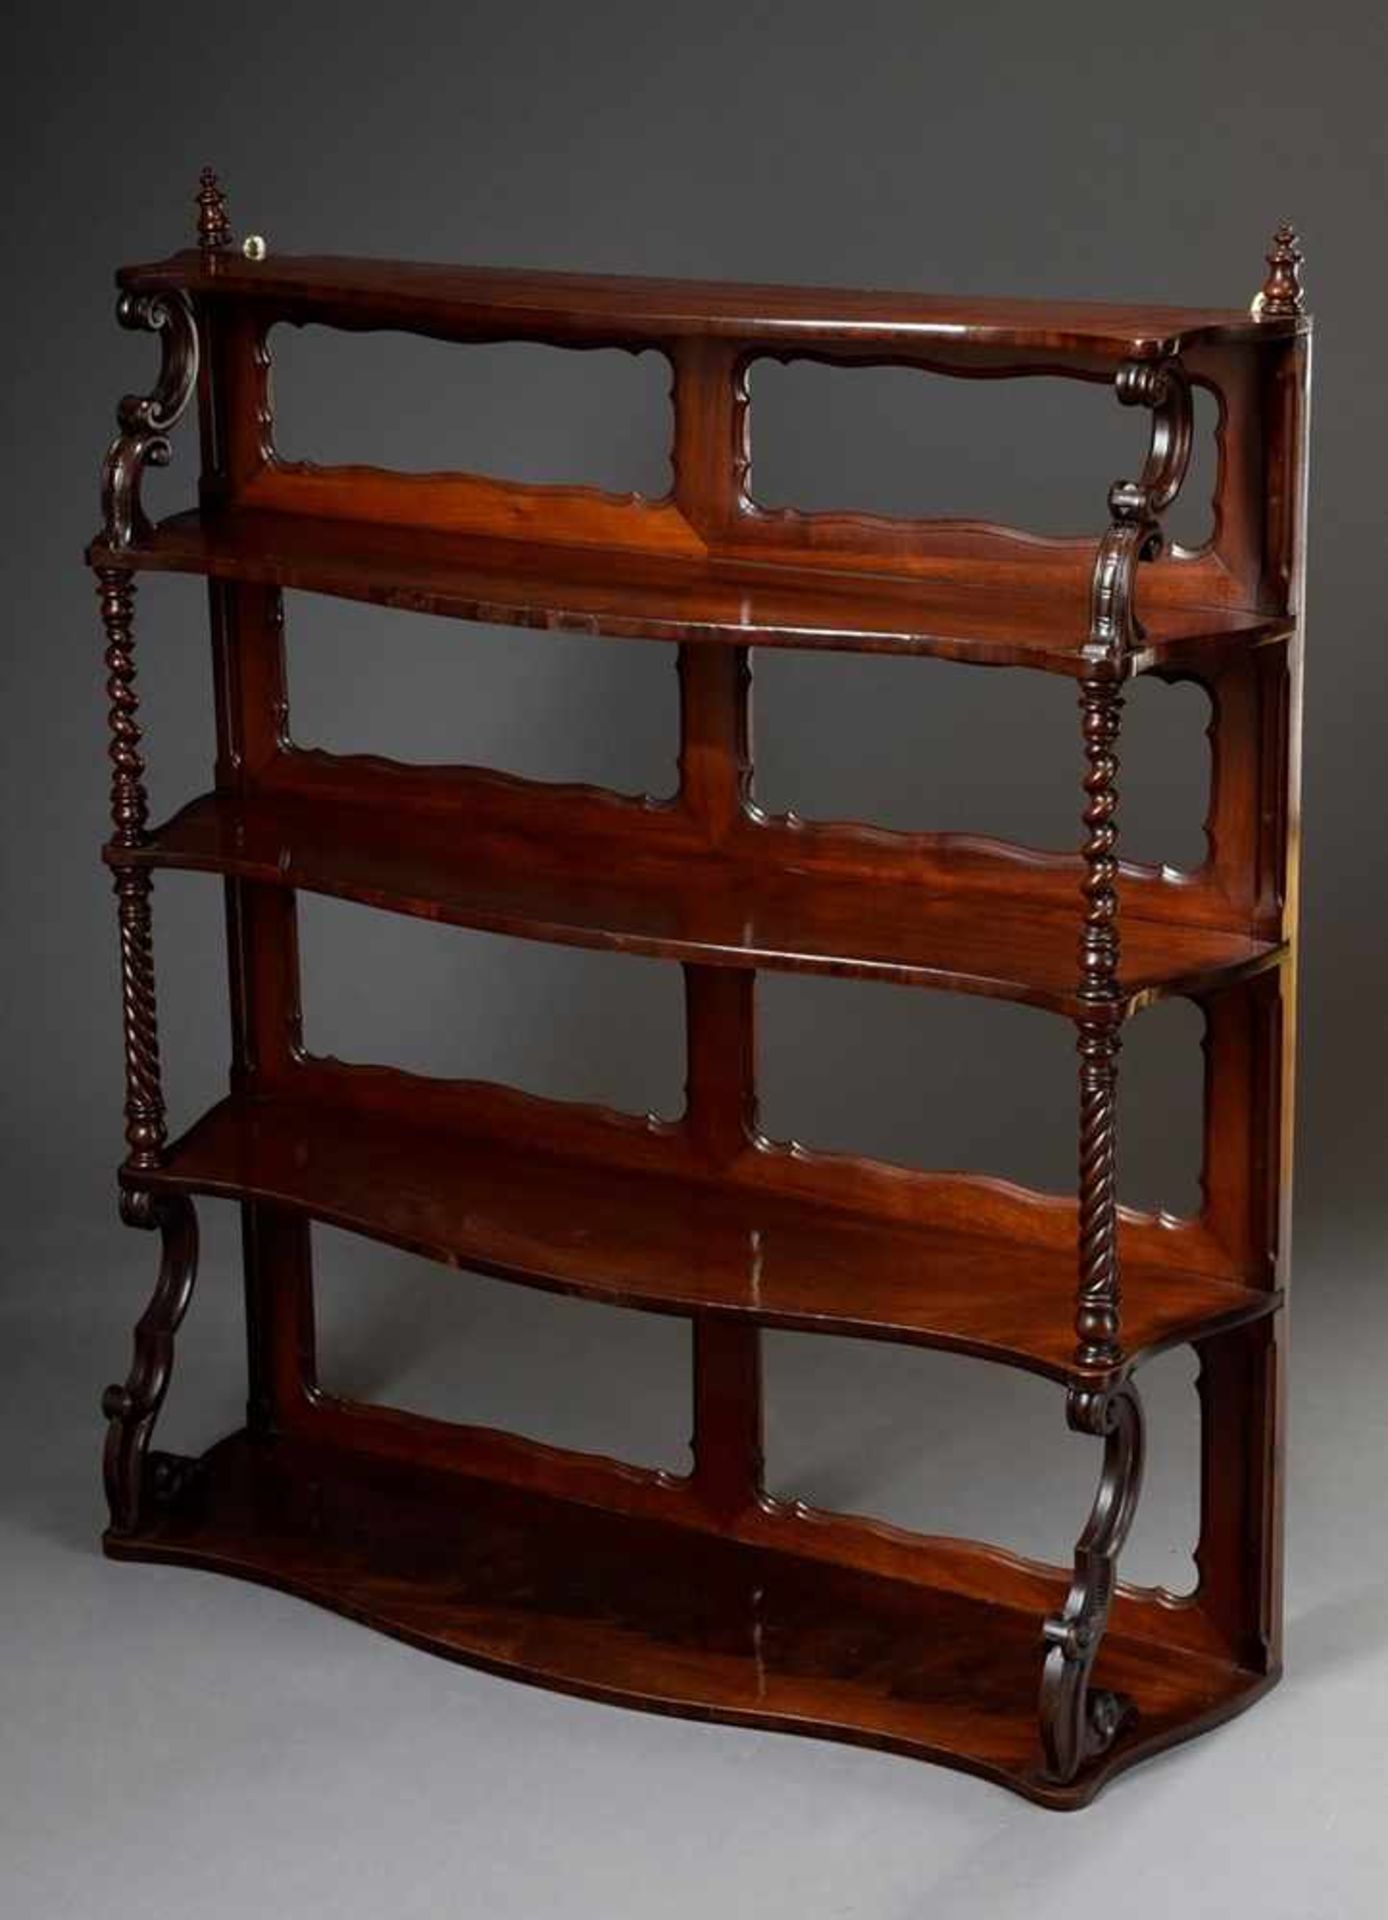 Late Biedermeier wall shelf with turned columns and 5 shelves, mahogany, end of 19th century,